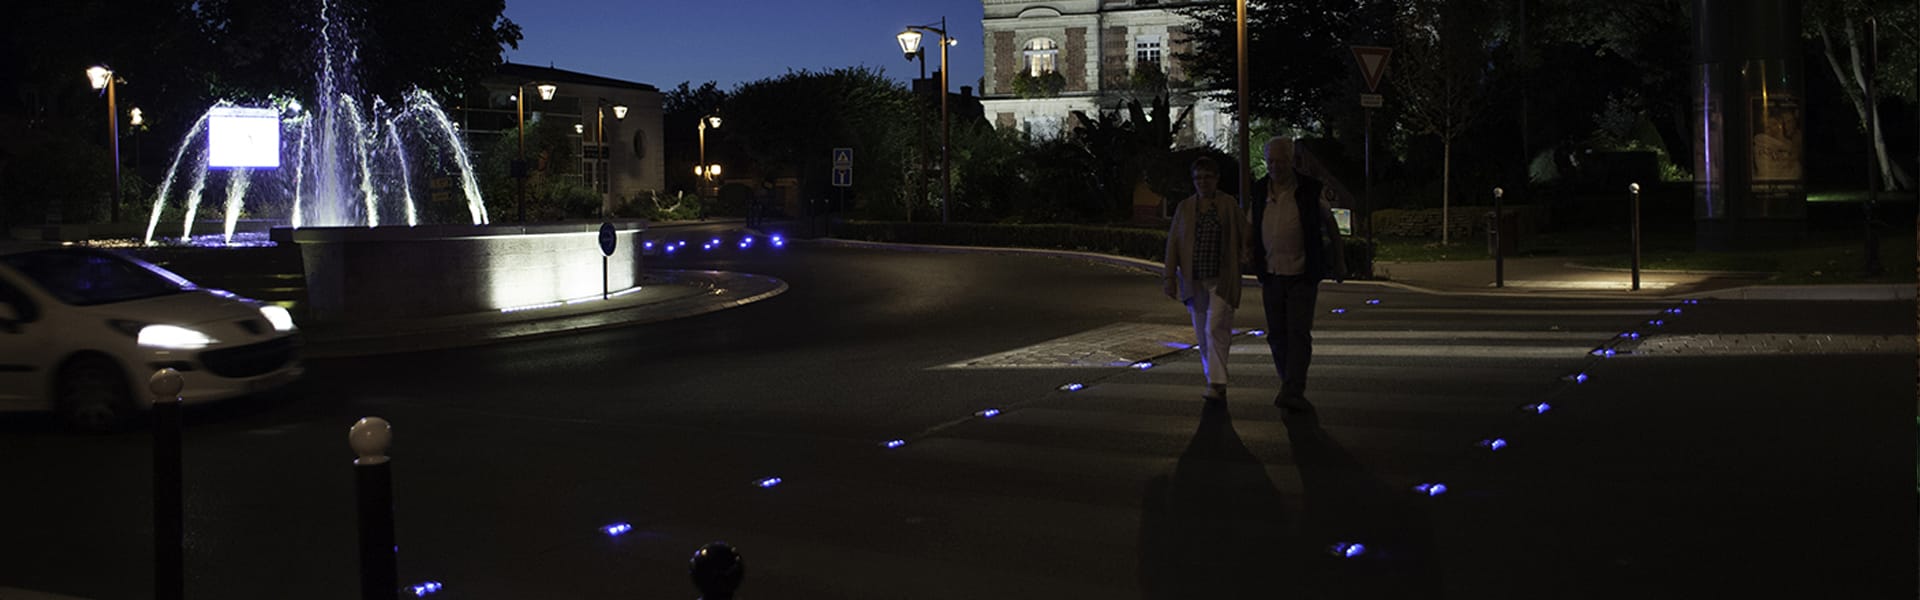 Pedestrian crossing safety - LED beaconing